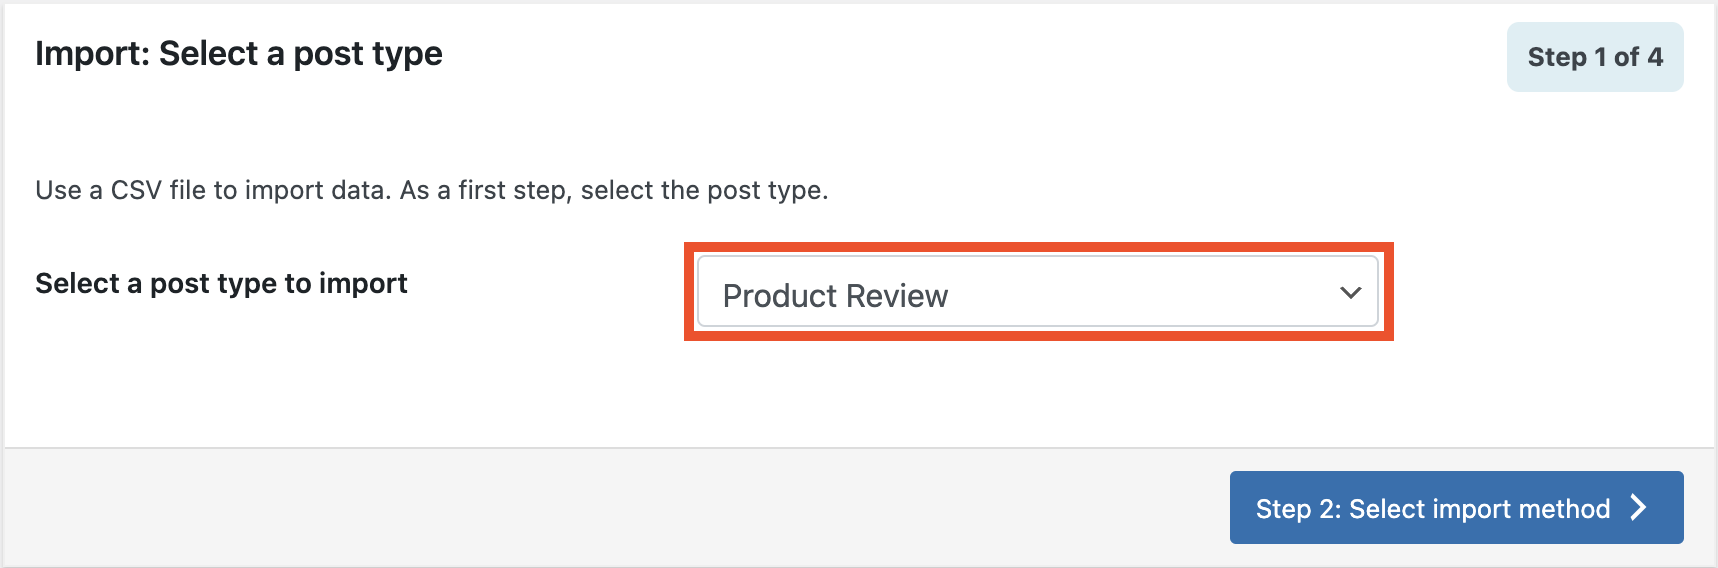 Select Product Review as the post type to import